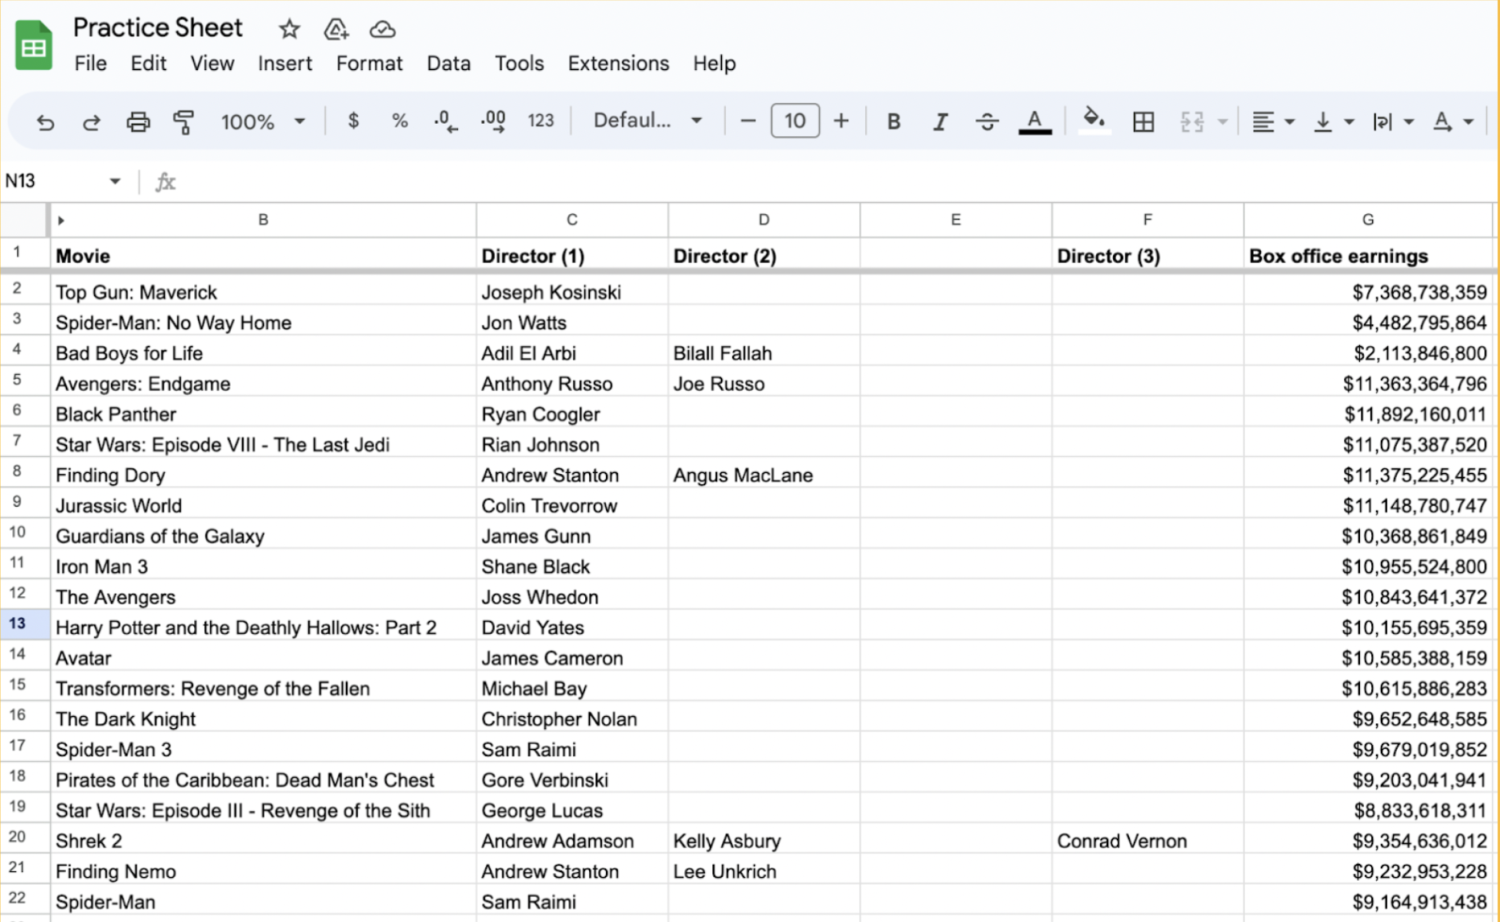 Add a Line of Best Fit in Google Sheets